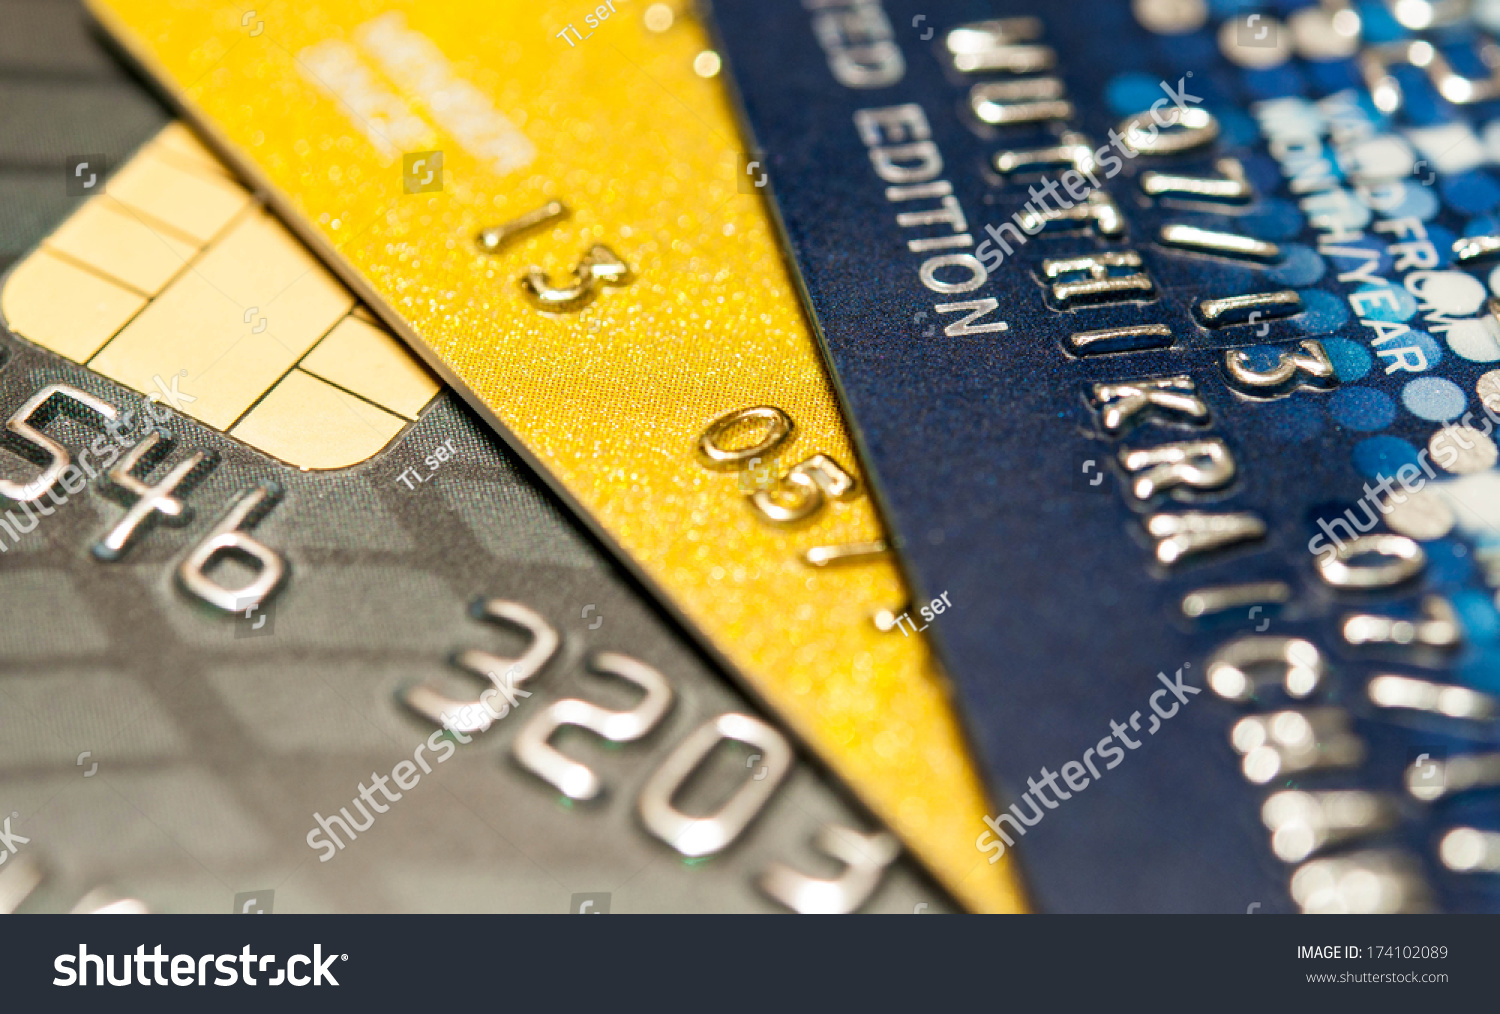 Credit Card Background Abstract Stock Photo 174102089 - Shutterstock